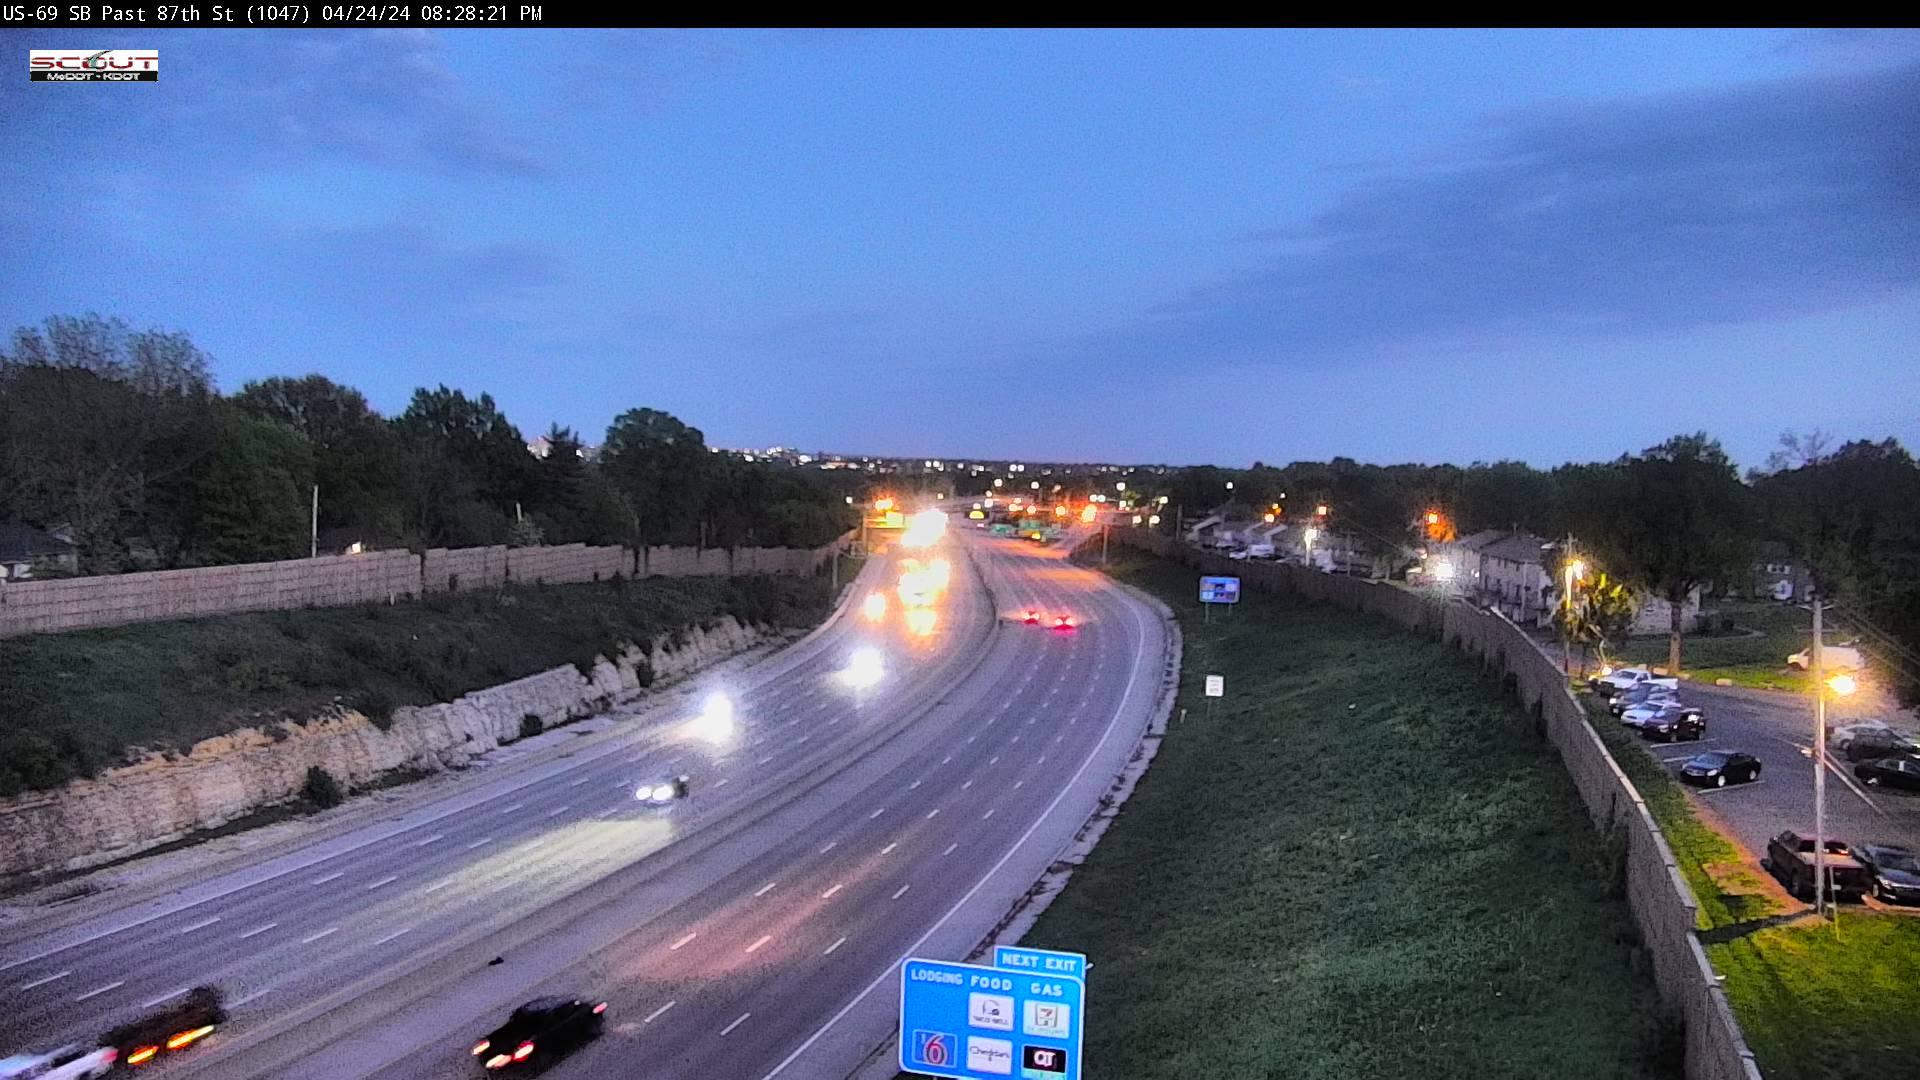 Traffic Cam Overland Park: US- S Past th Street Player